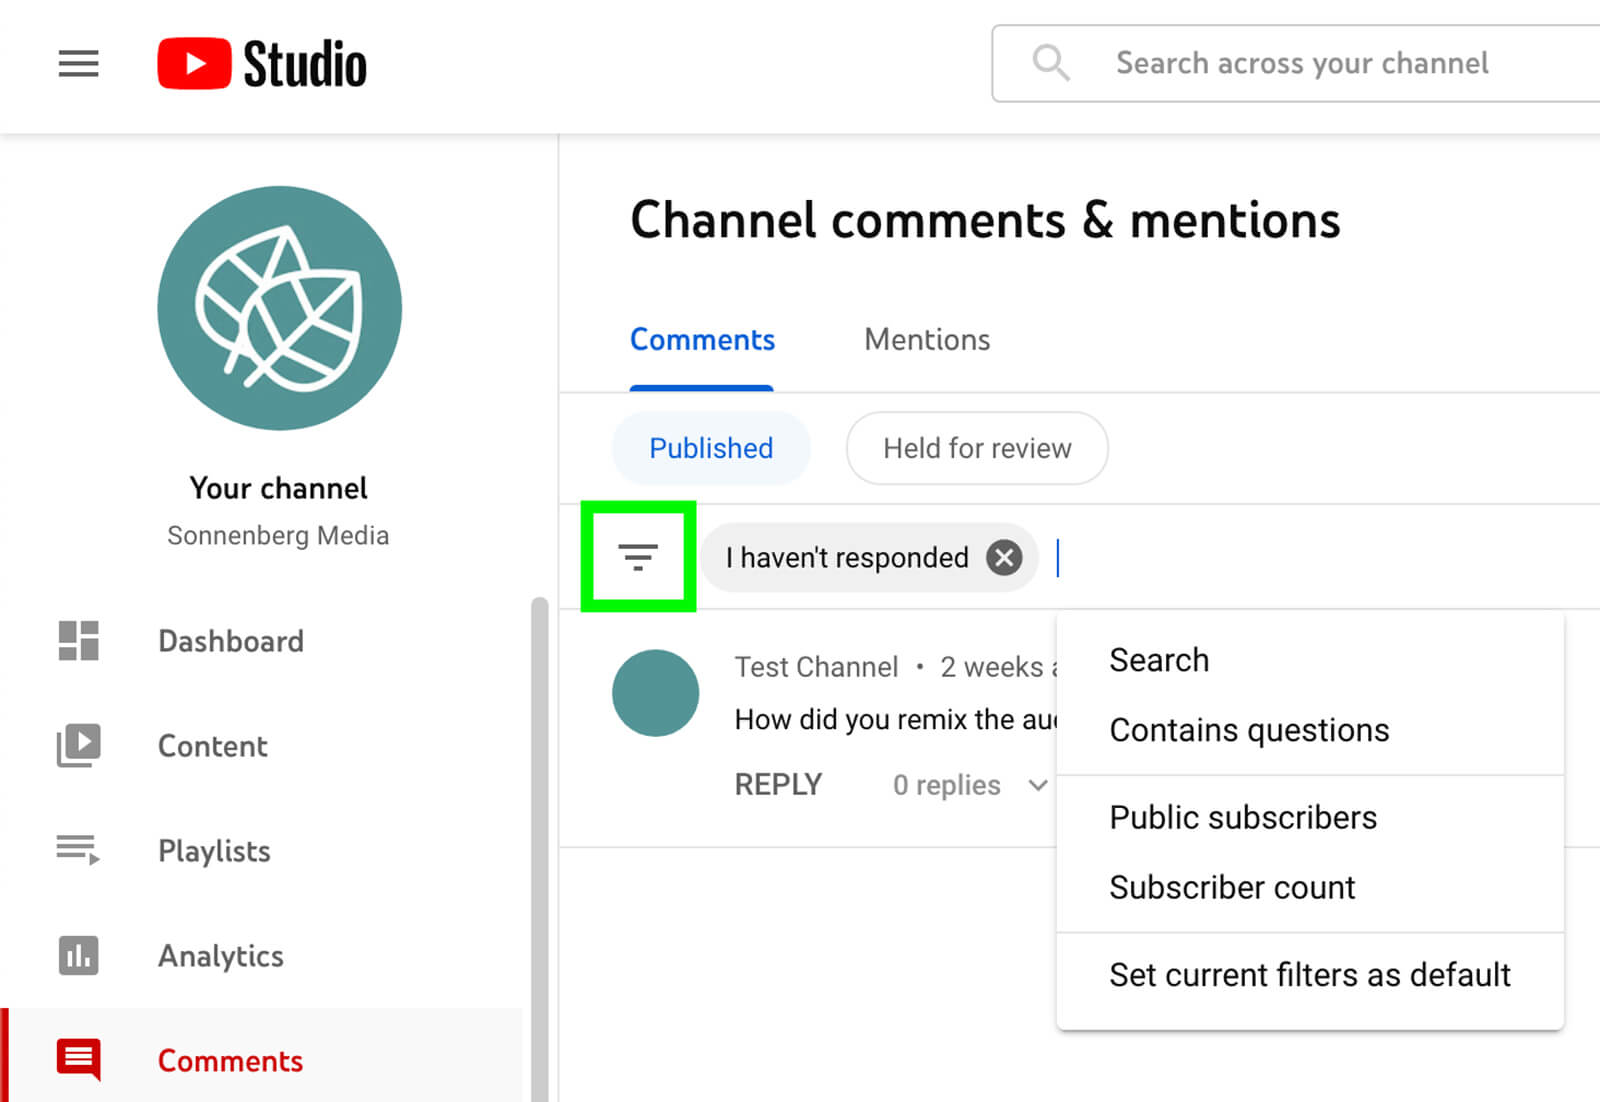 how-marketers-can-maximize-the-shorts-commenting-feature-designate-top-comments-youtube-studio-sort-filter-keywords-or-questions-sonnenbergmedia-example-12